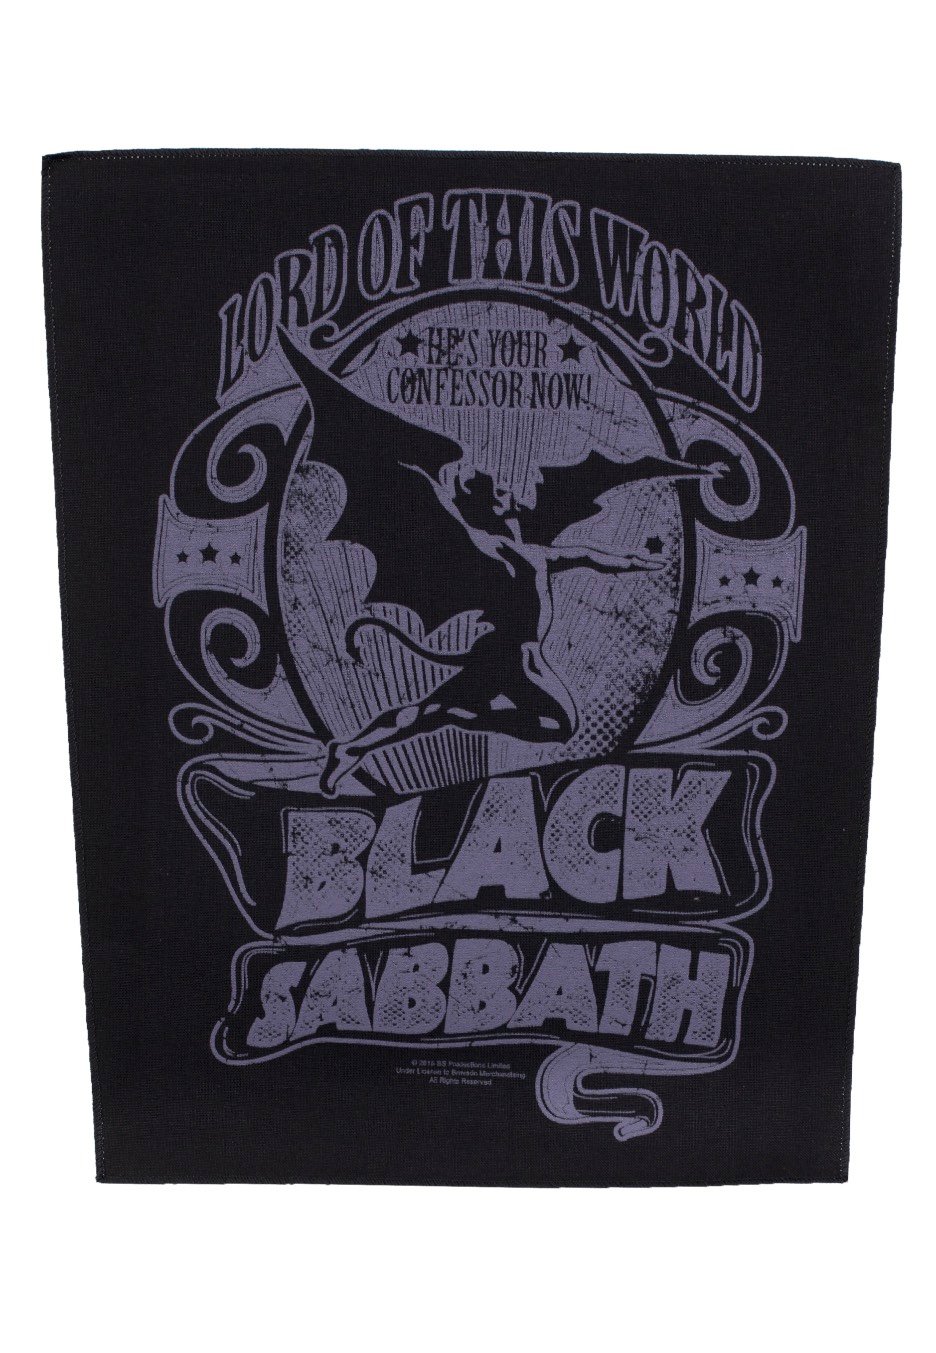 Black Sabbath - Lord Of This World - Backpatch